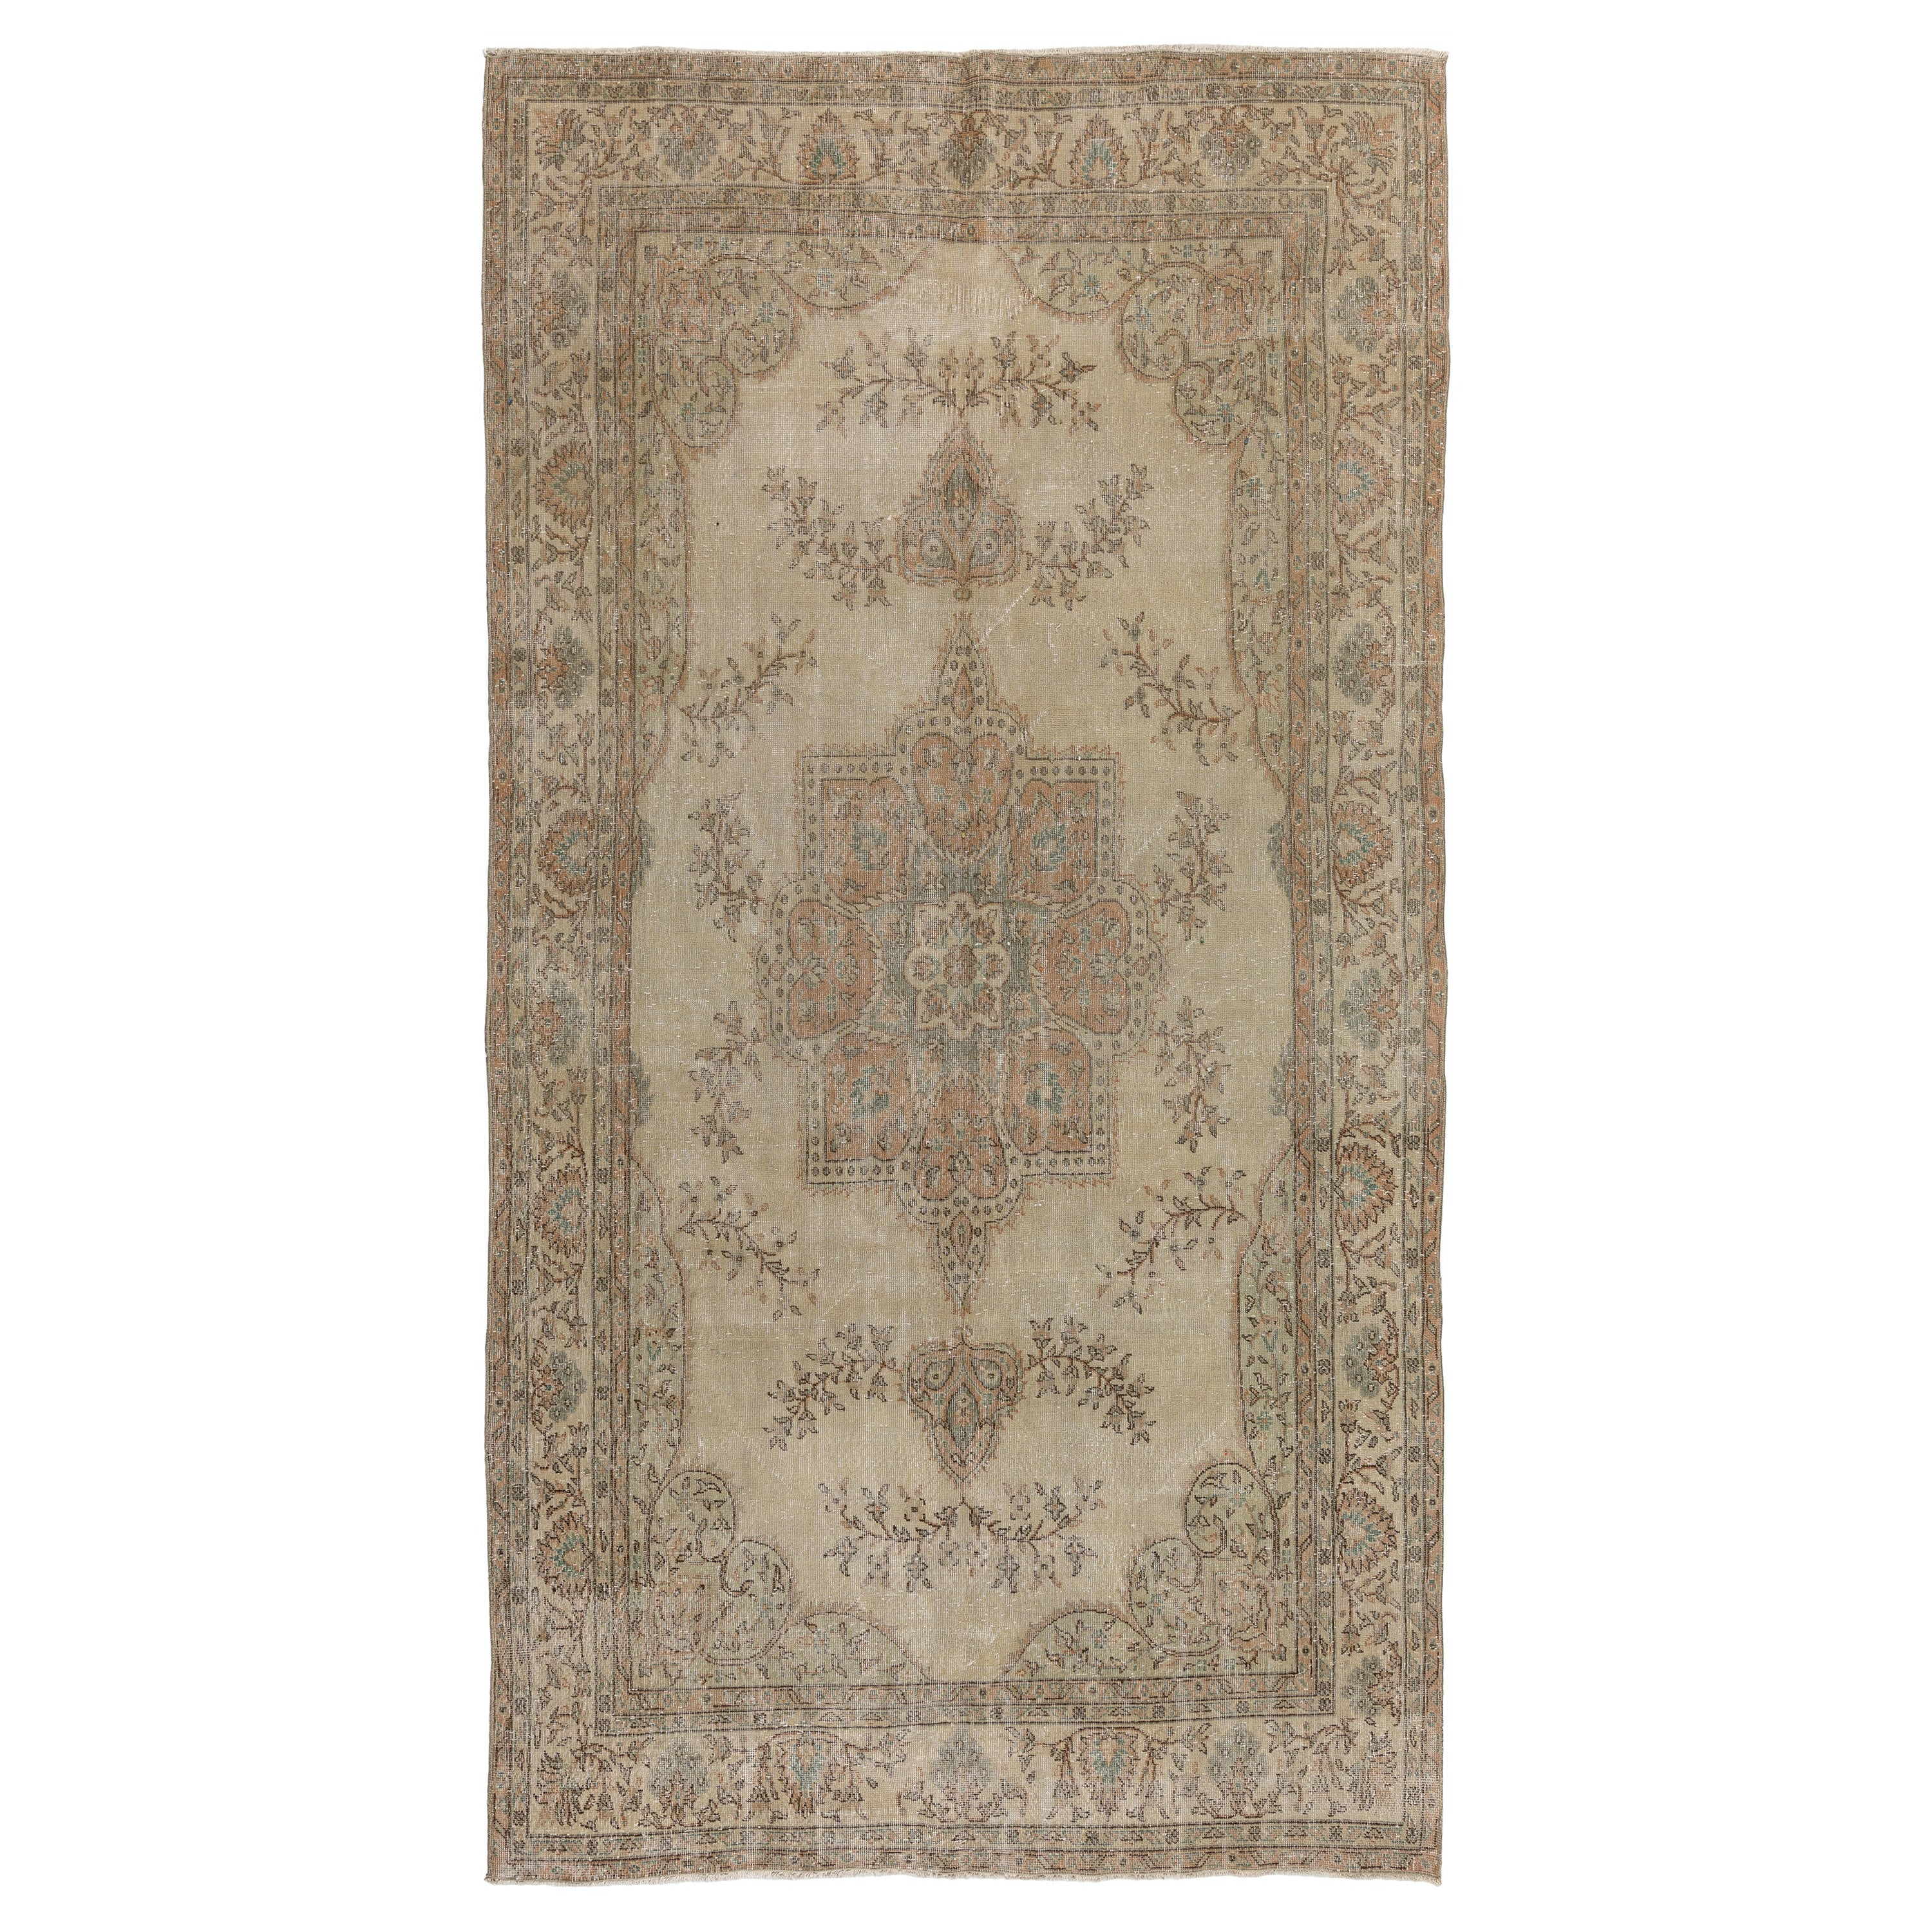 6.4x11.5 Ft Vintage Hand Knotted Turkish Sun Faded Wool Area Rug in Beige Colors For Sale